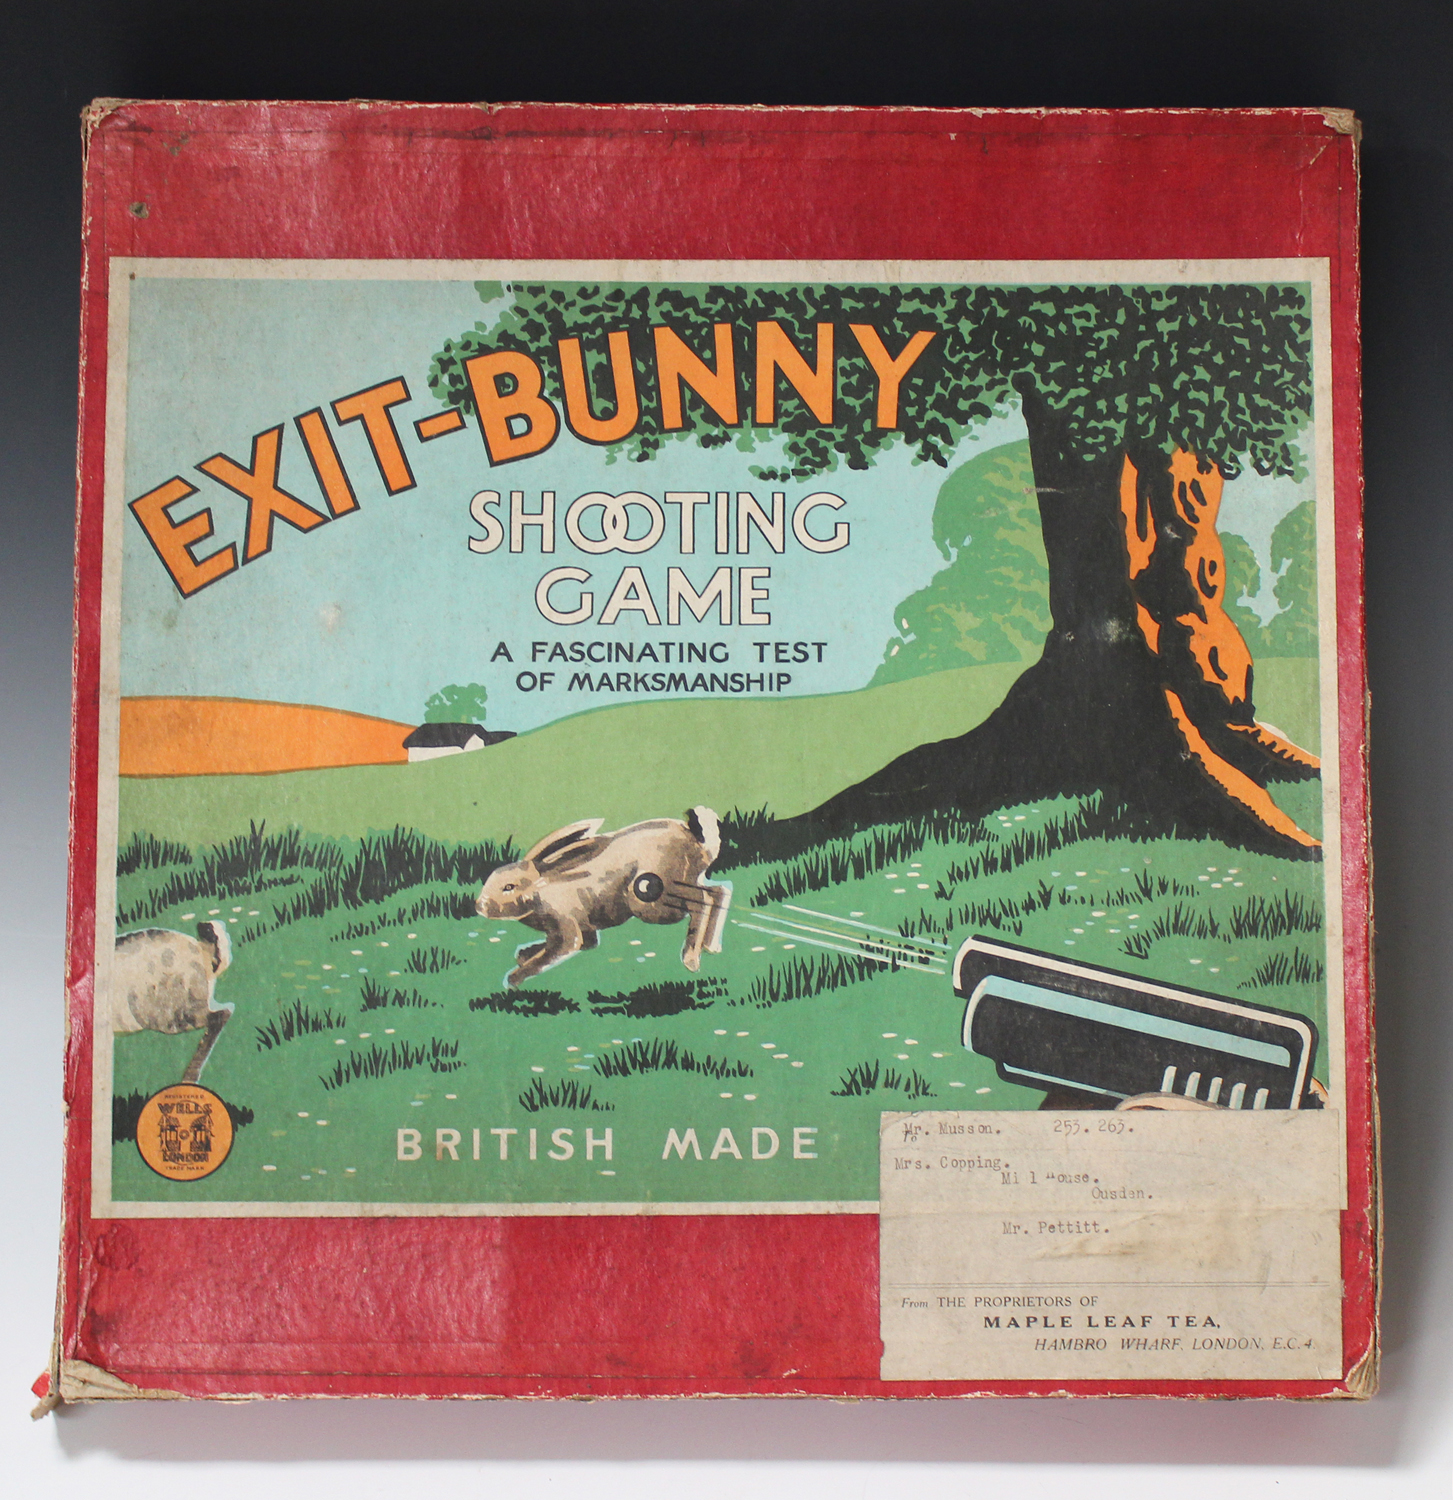 A Wells Exit-Bunny Shooting Game, boxed, with two pistols and a small quantity of bullets (playwear